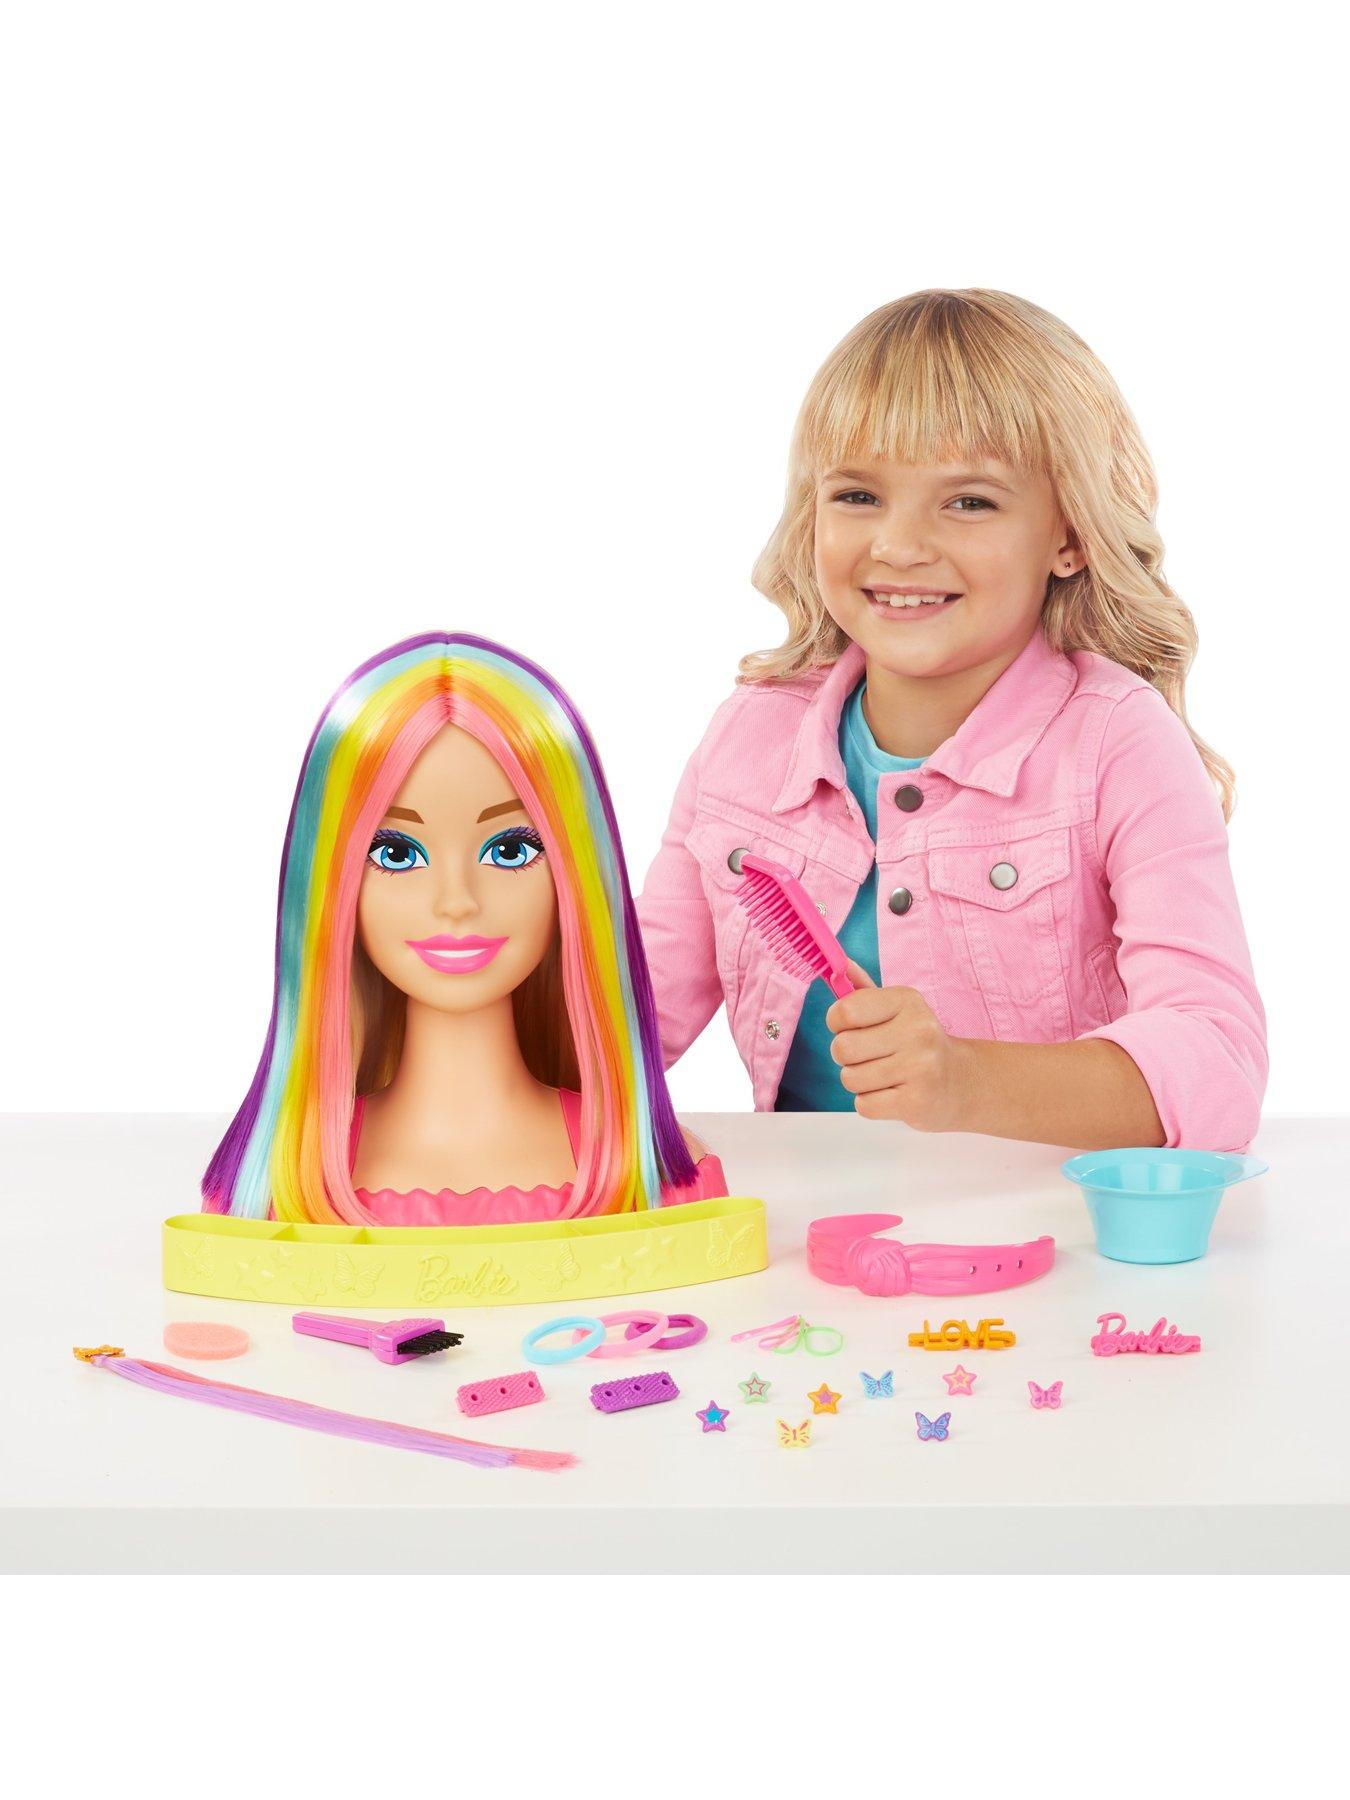 Barbie Totally Hair Deluxe Neon Styling Head - Straight Blonde